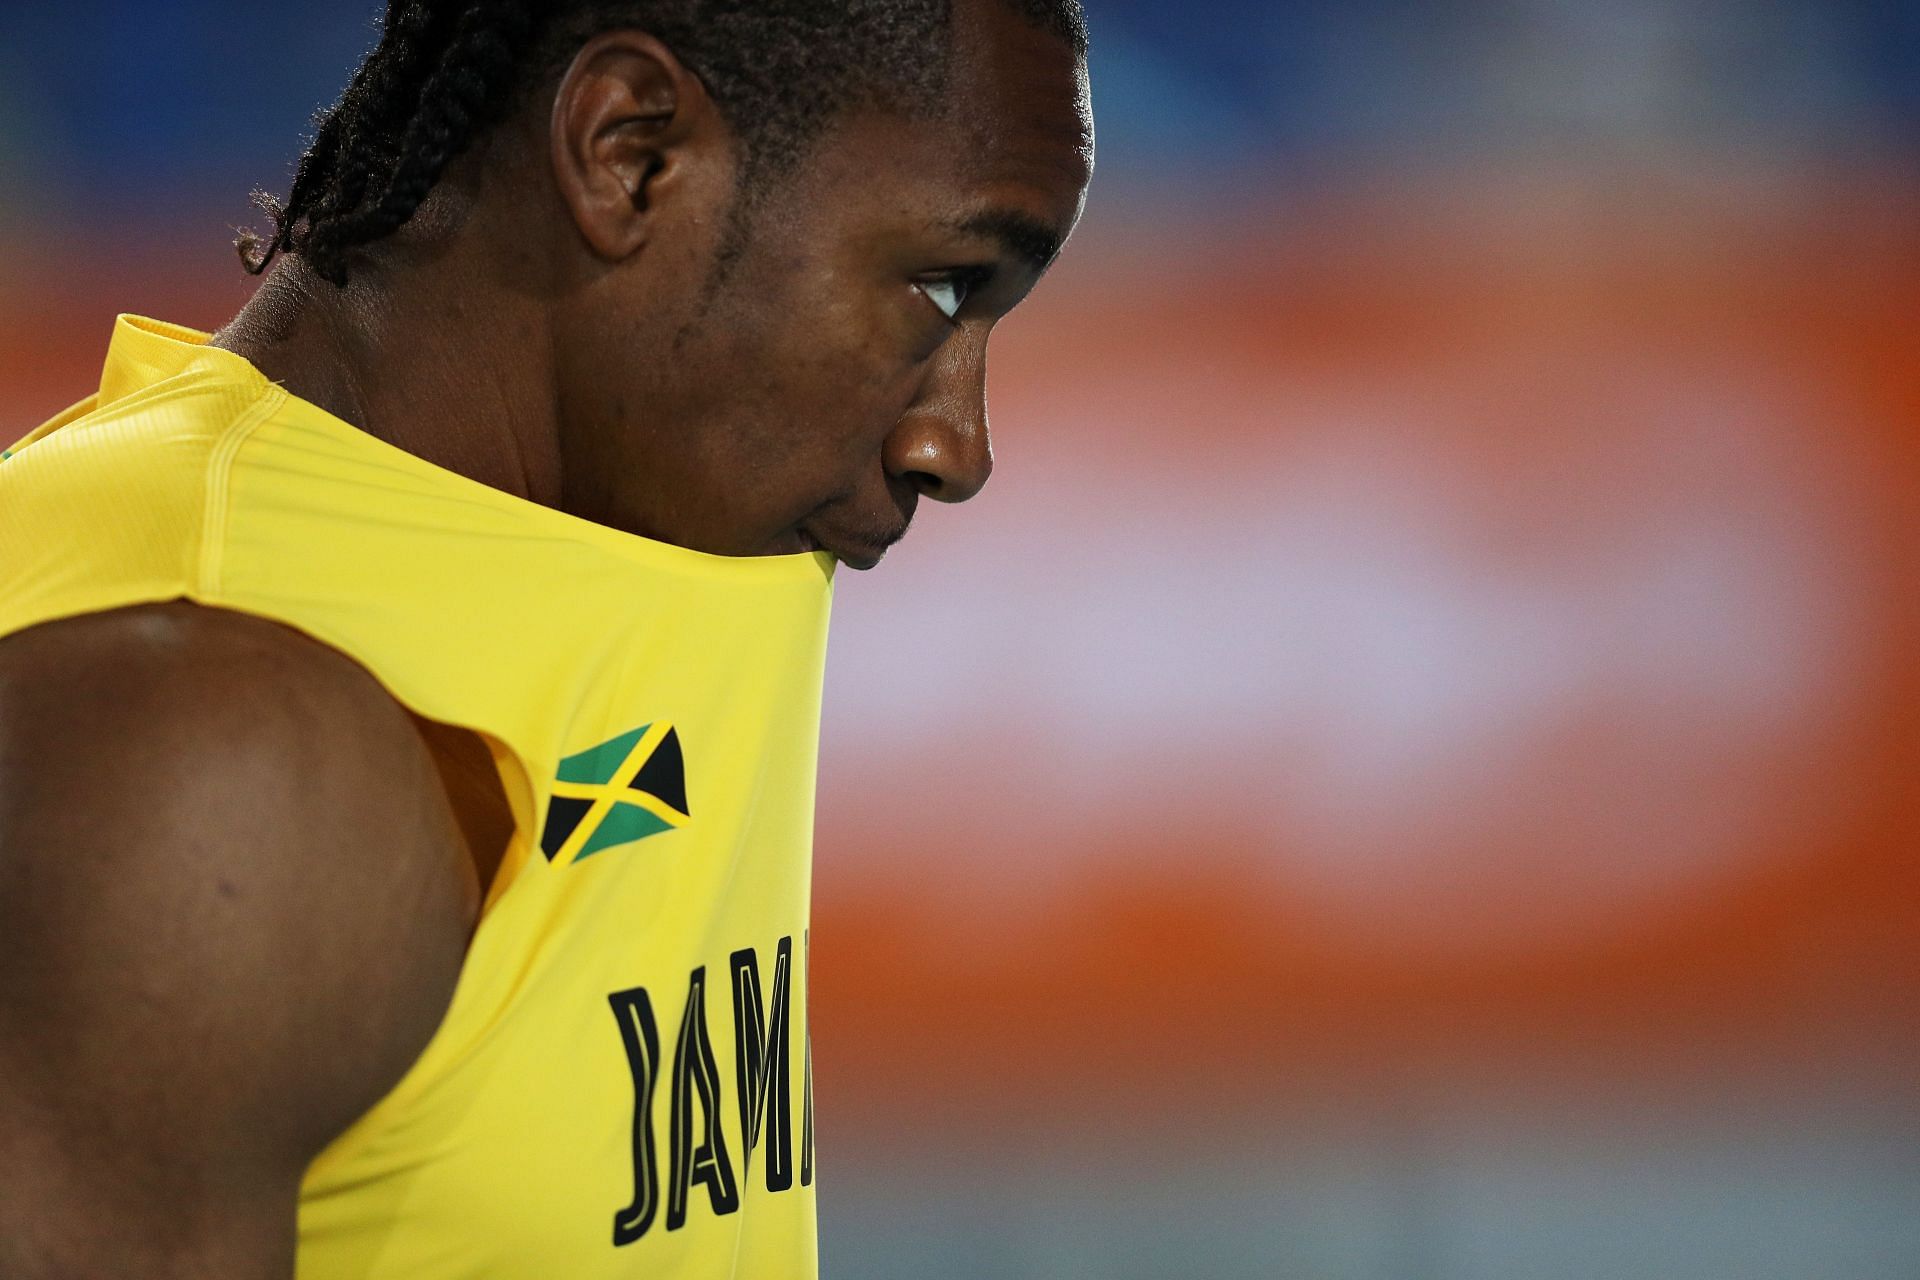 Yohan Blake opens up on the challenges he faced in his career.